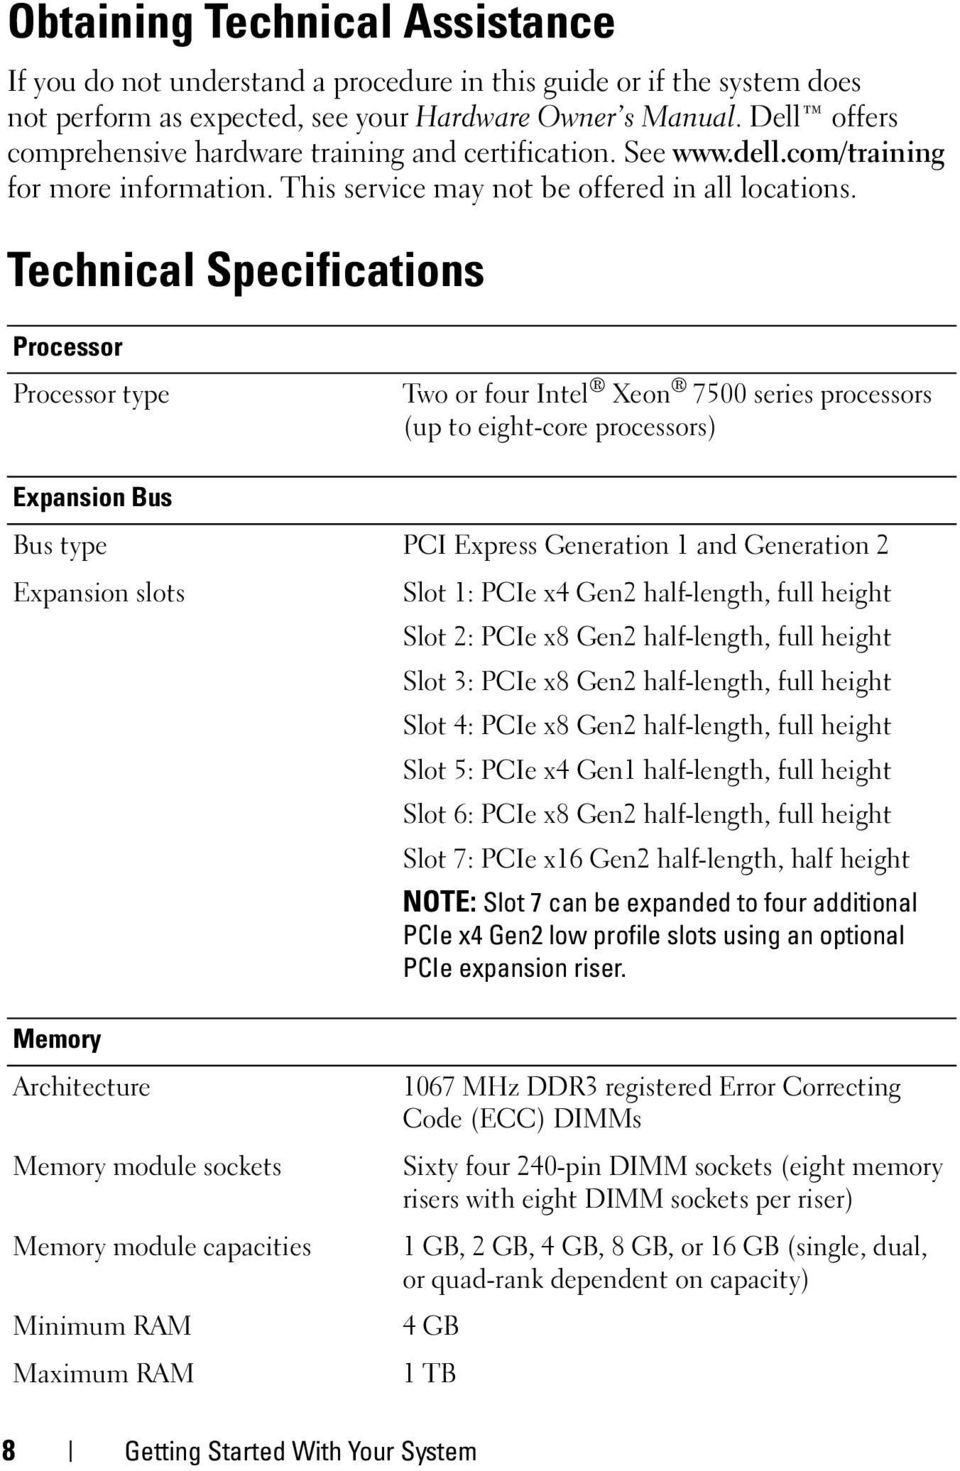 Technical Specifications Processor Processor type Two or four Intel Xeon 7500 series processors (up to eight-core processors) Expansion Bus Bus type PCI Express Generation 1 and Generation 2